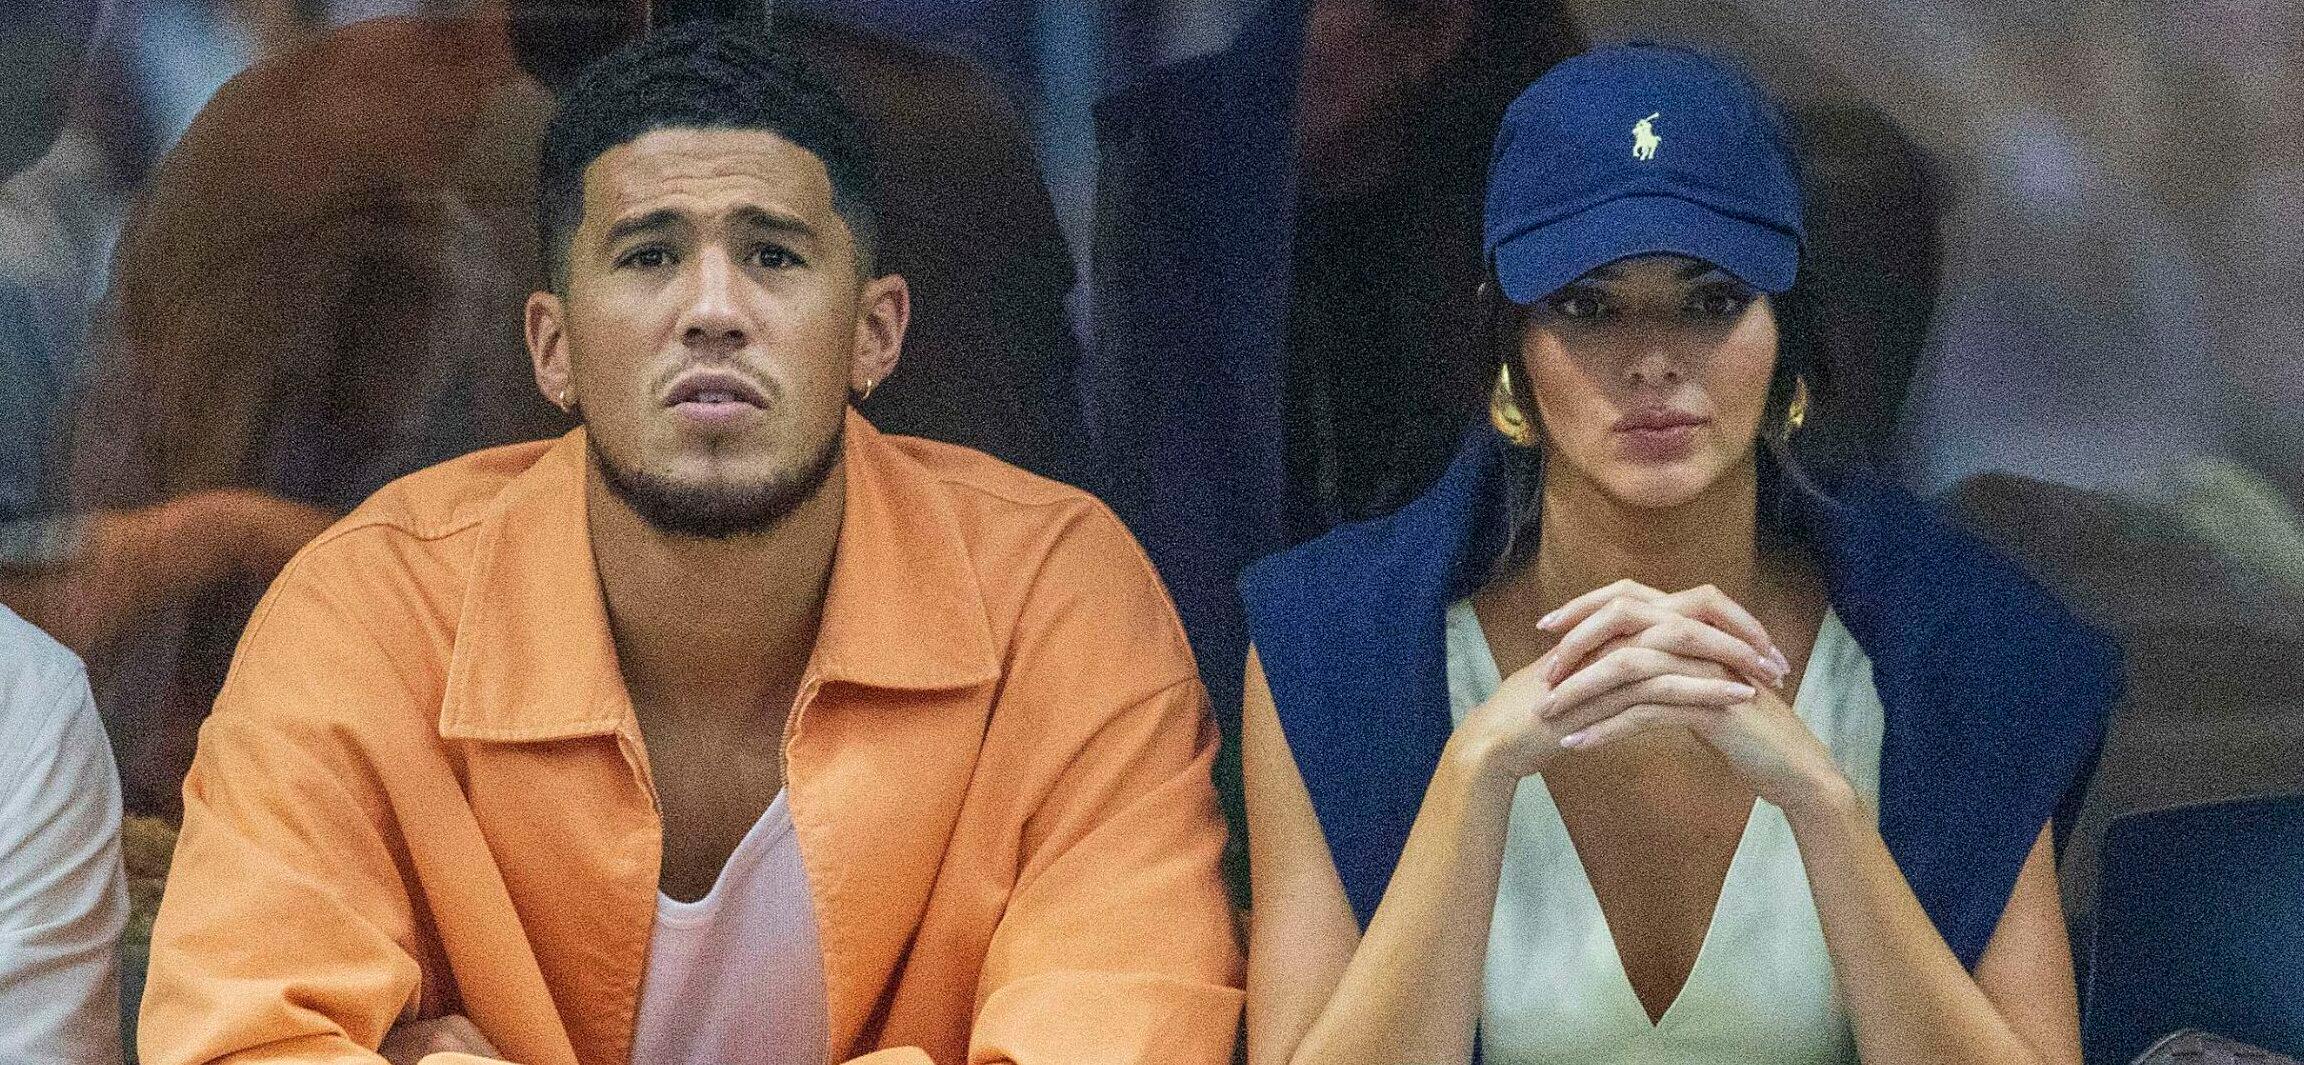 //Why_Kendall_Jenner_Devin_Booker_Split_Up scaled e